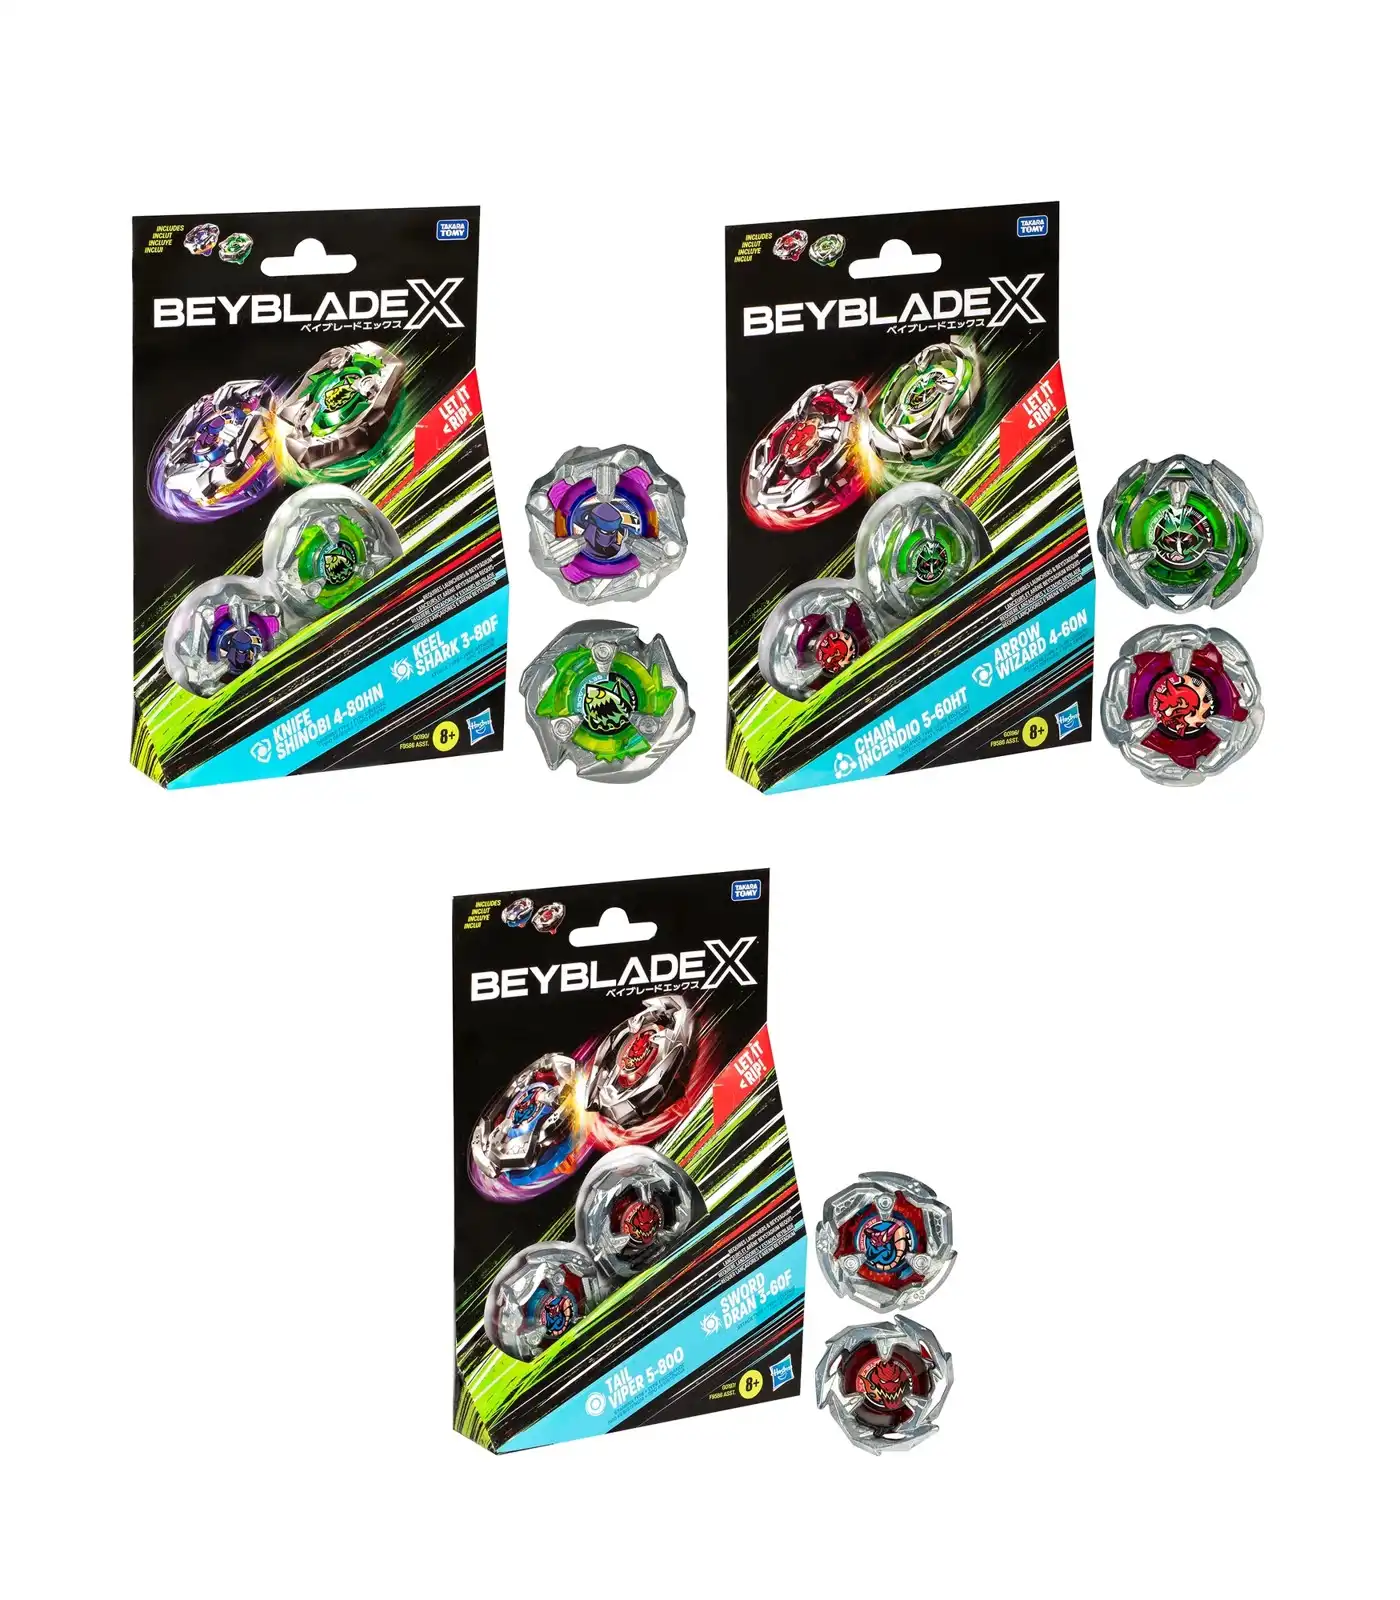 Beyblade X Dual Pack Assorted